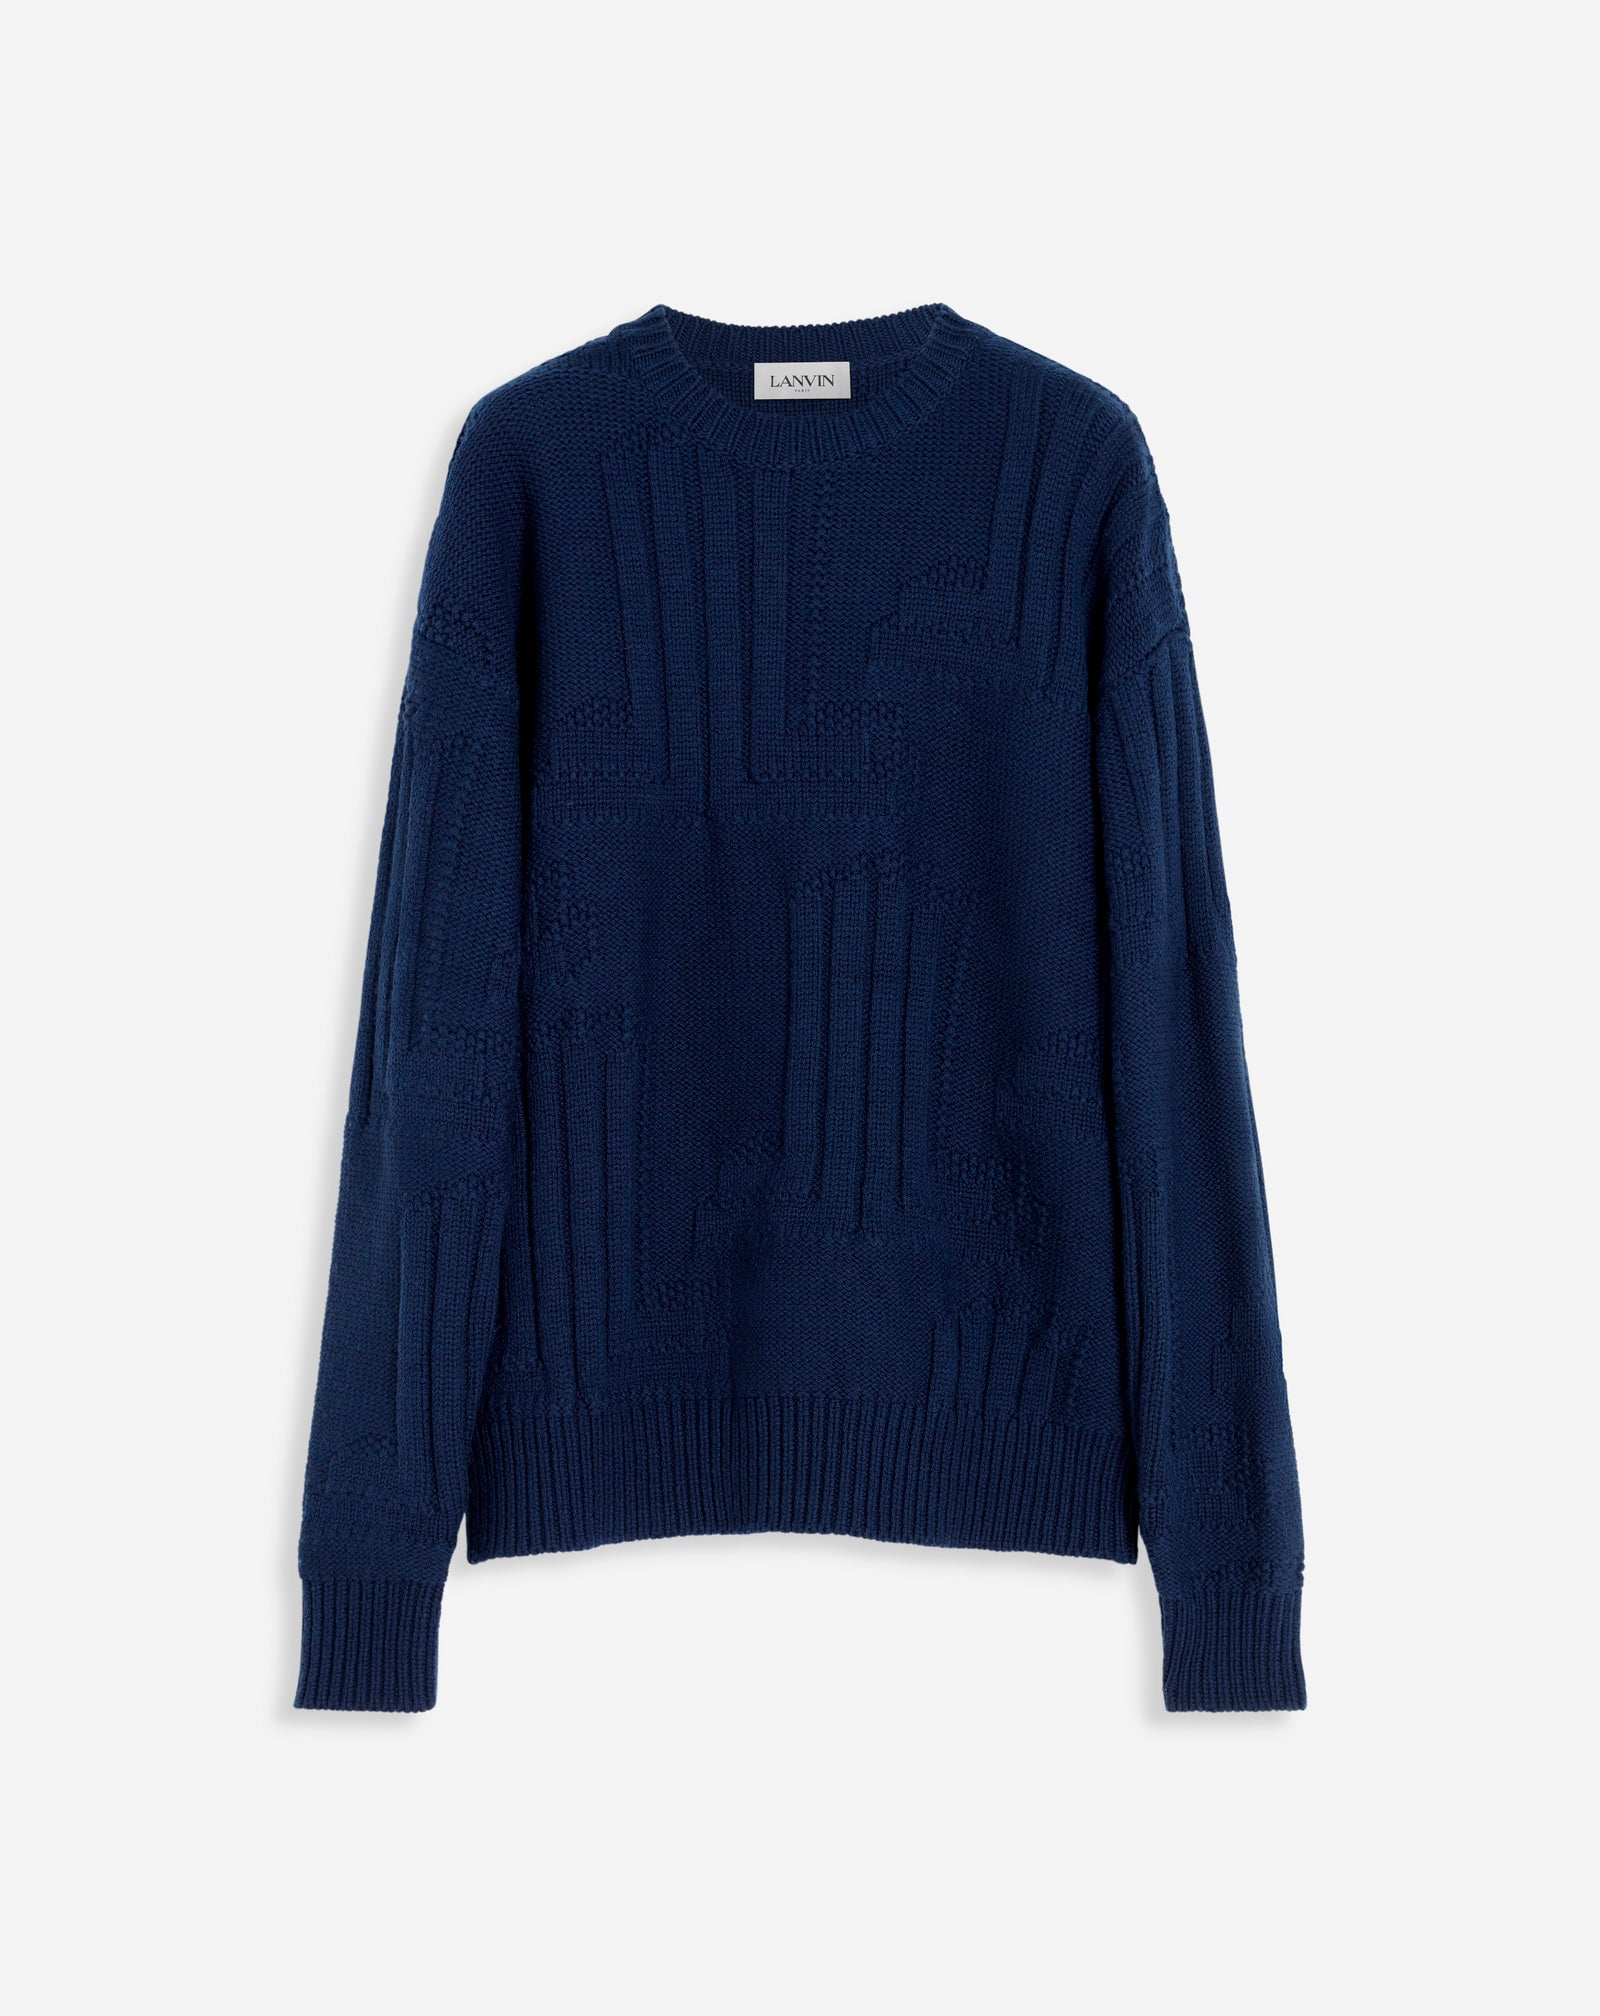 JL3D THICK ROUND NECK SWEATER, BLUE